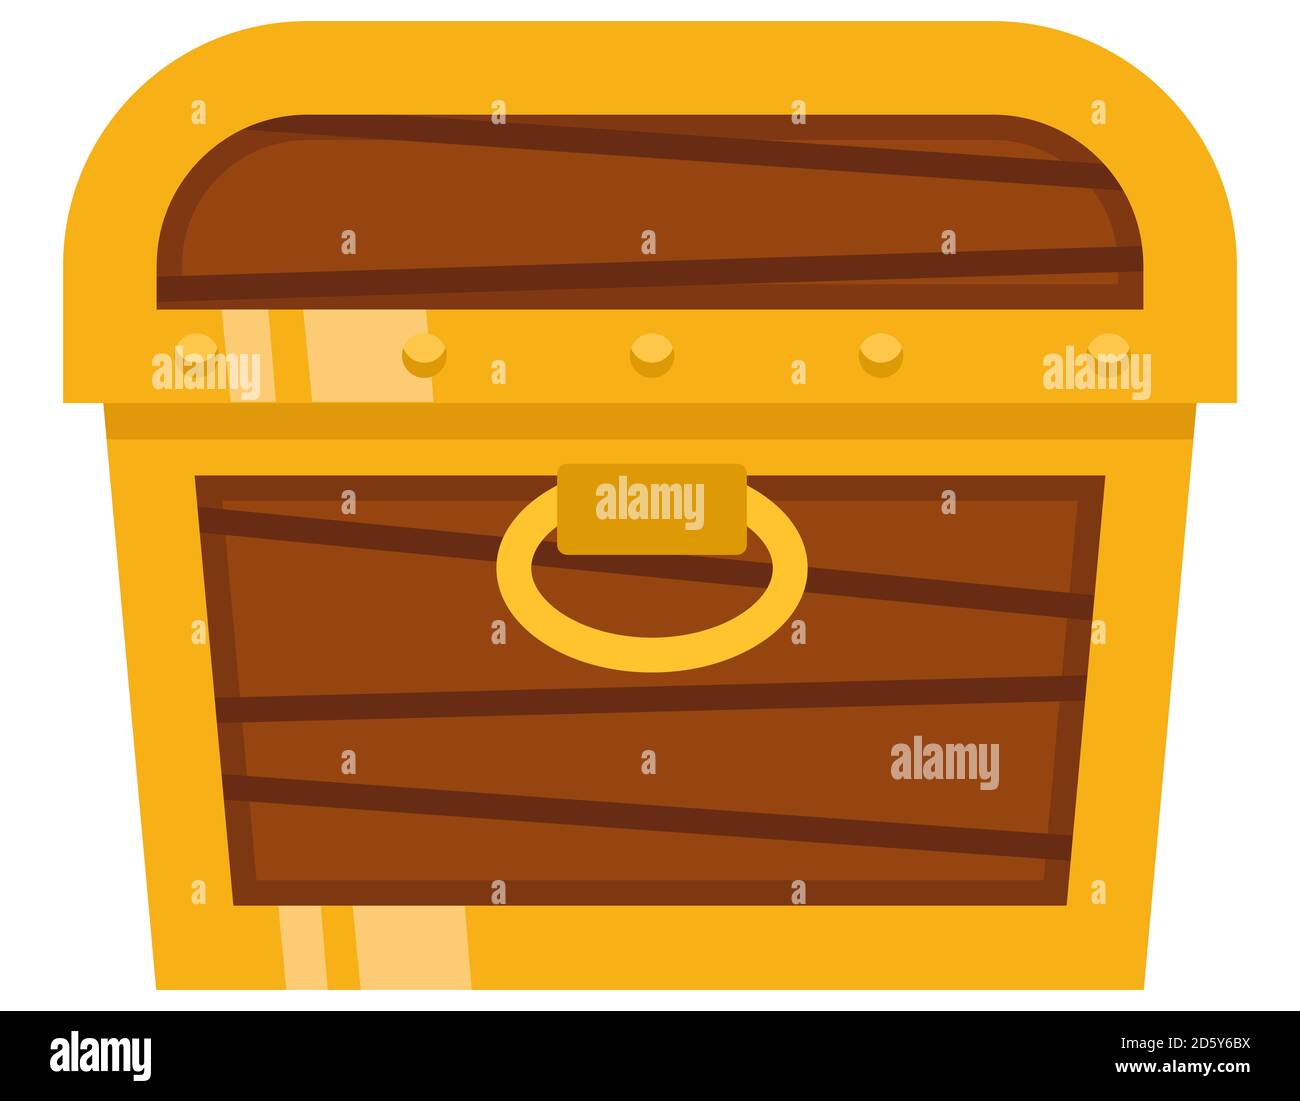 Pirate treasure chest. Vintage wooden object in flat style. Stock Vector